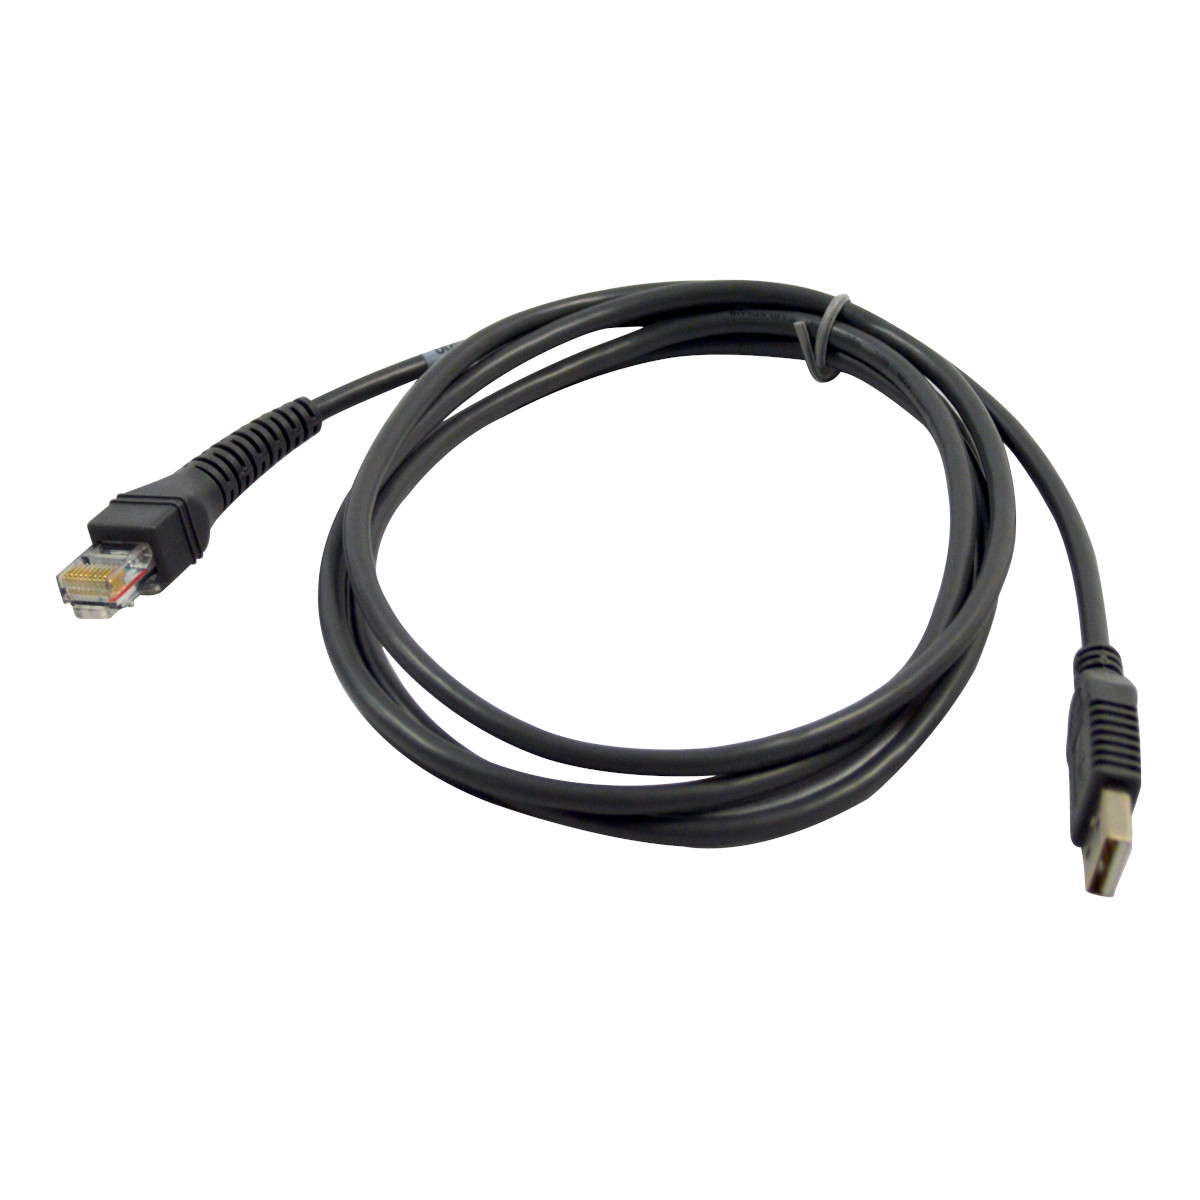 USB to RJ45 6' Cable for Code Reader